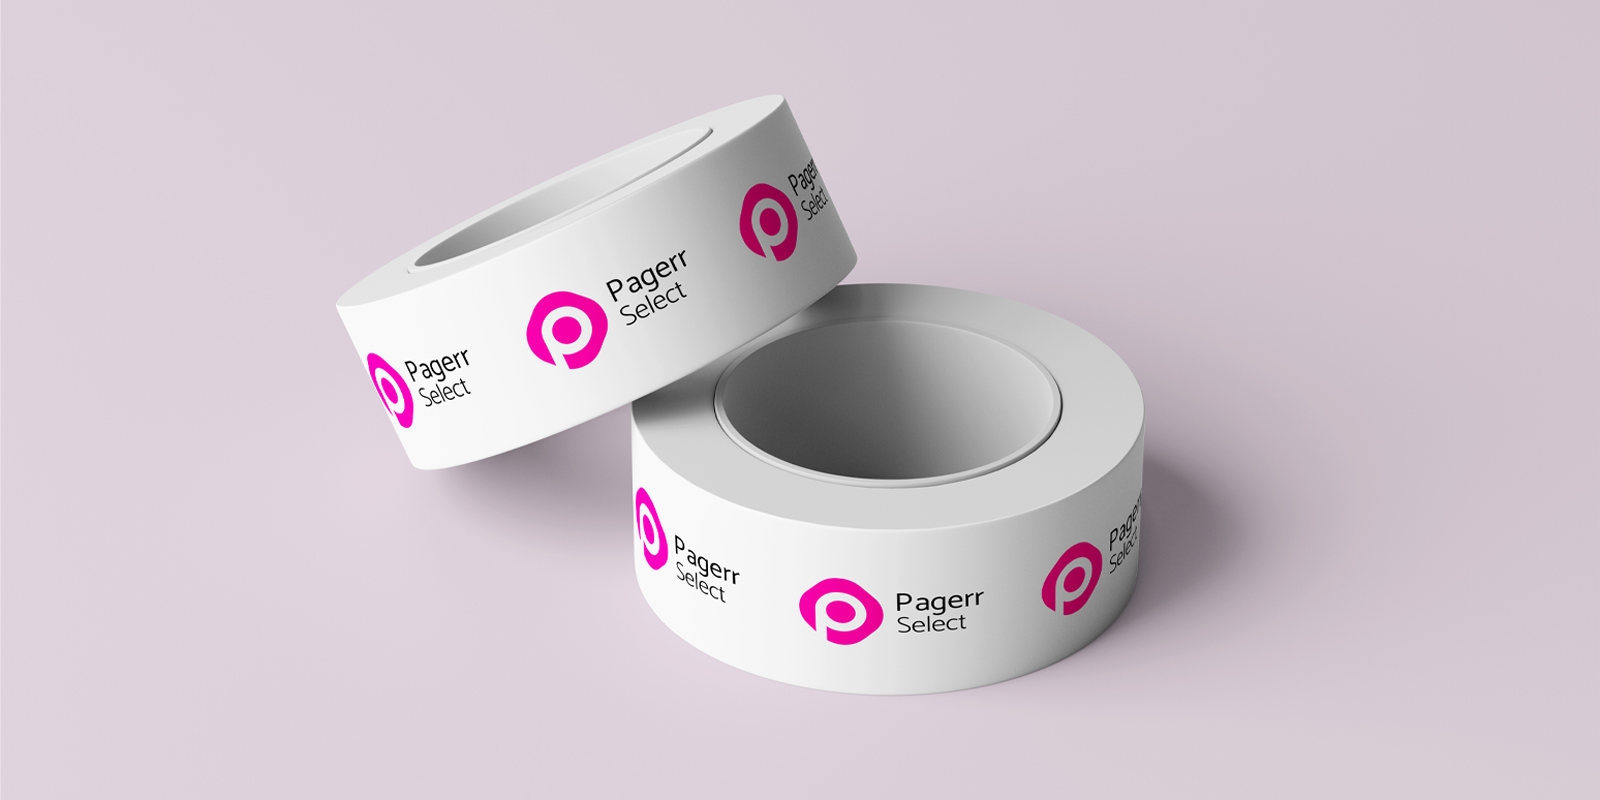 Logo tapes in Newcastle - Print with Pagerr